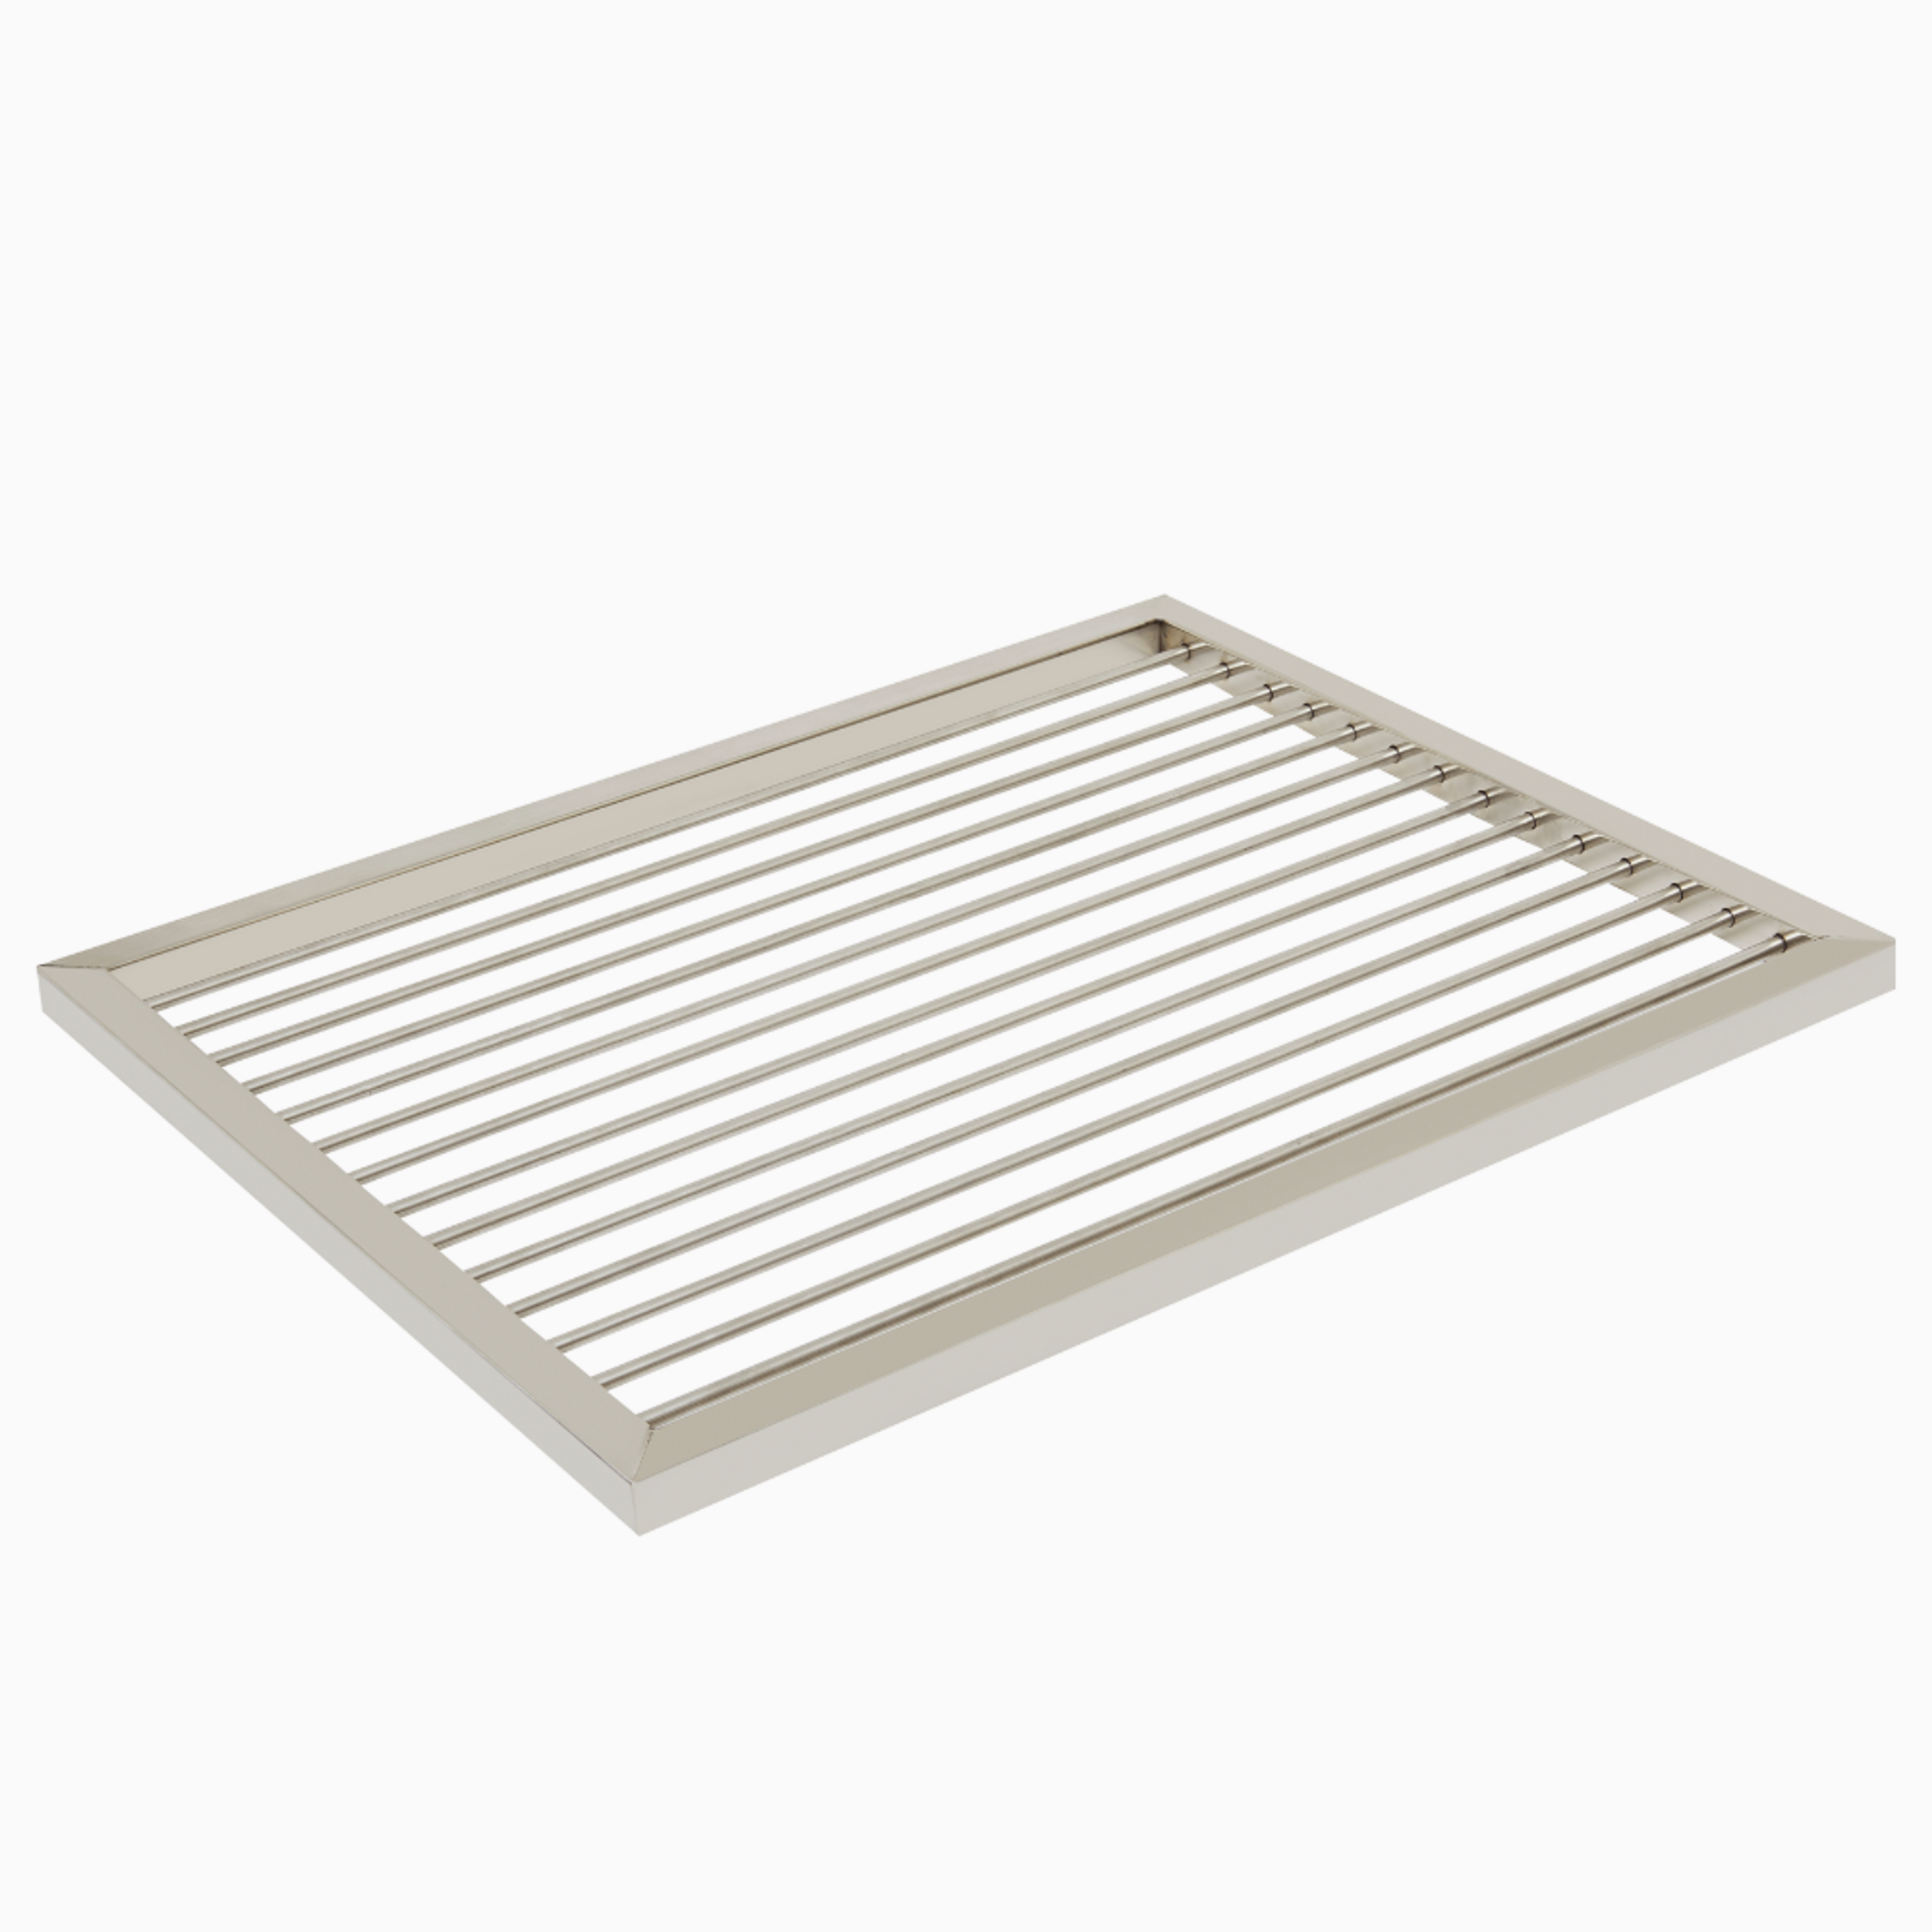 H1 Stainless Steel Grill Rack